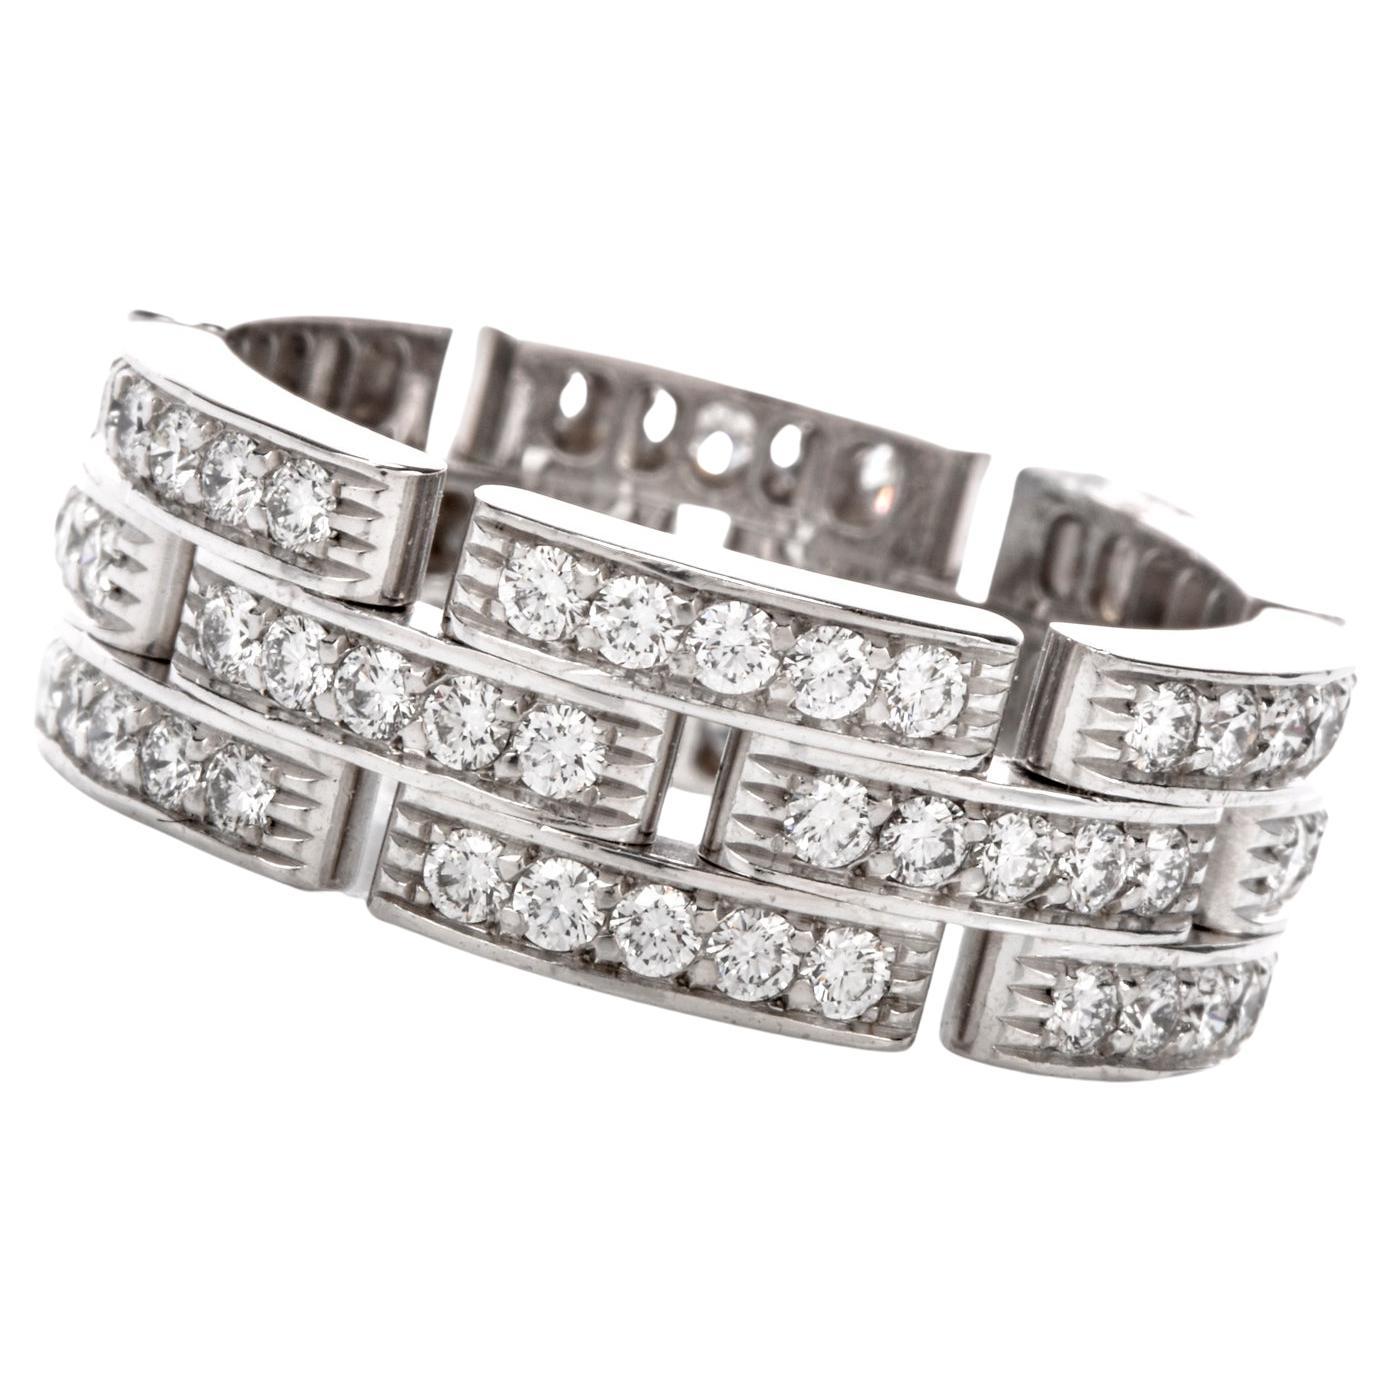 A bit of Cartier for a lifetime!

Enjoy a lifetime of wear with this 8mm wide

Cartier diamond wedding band ring from 